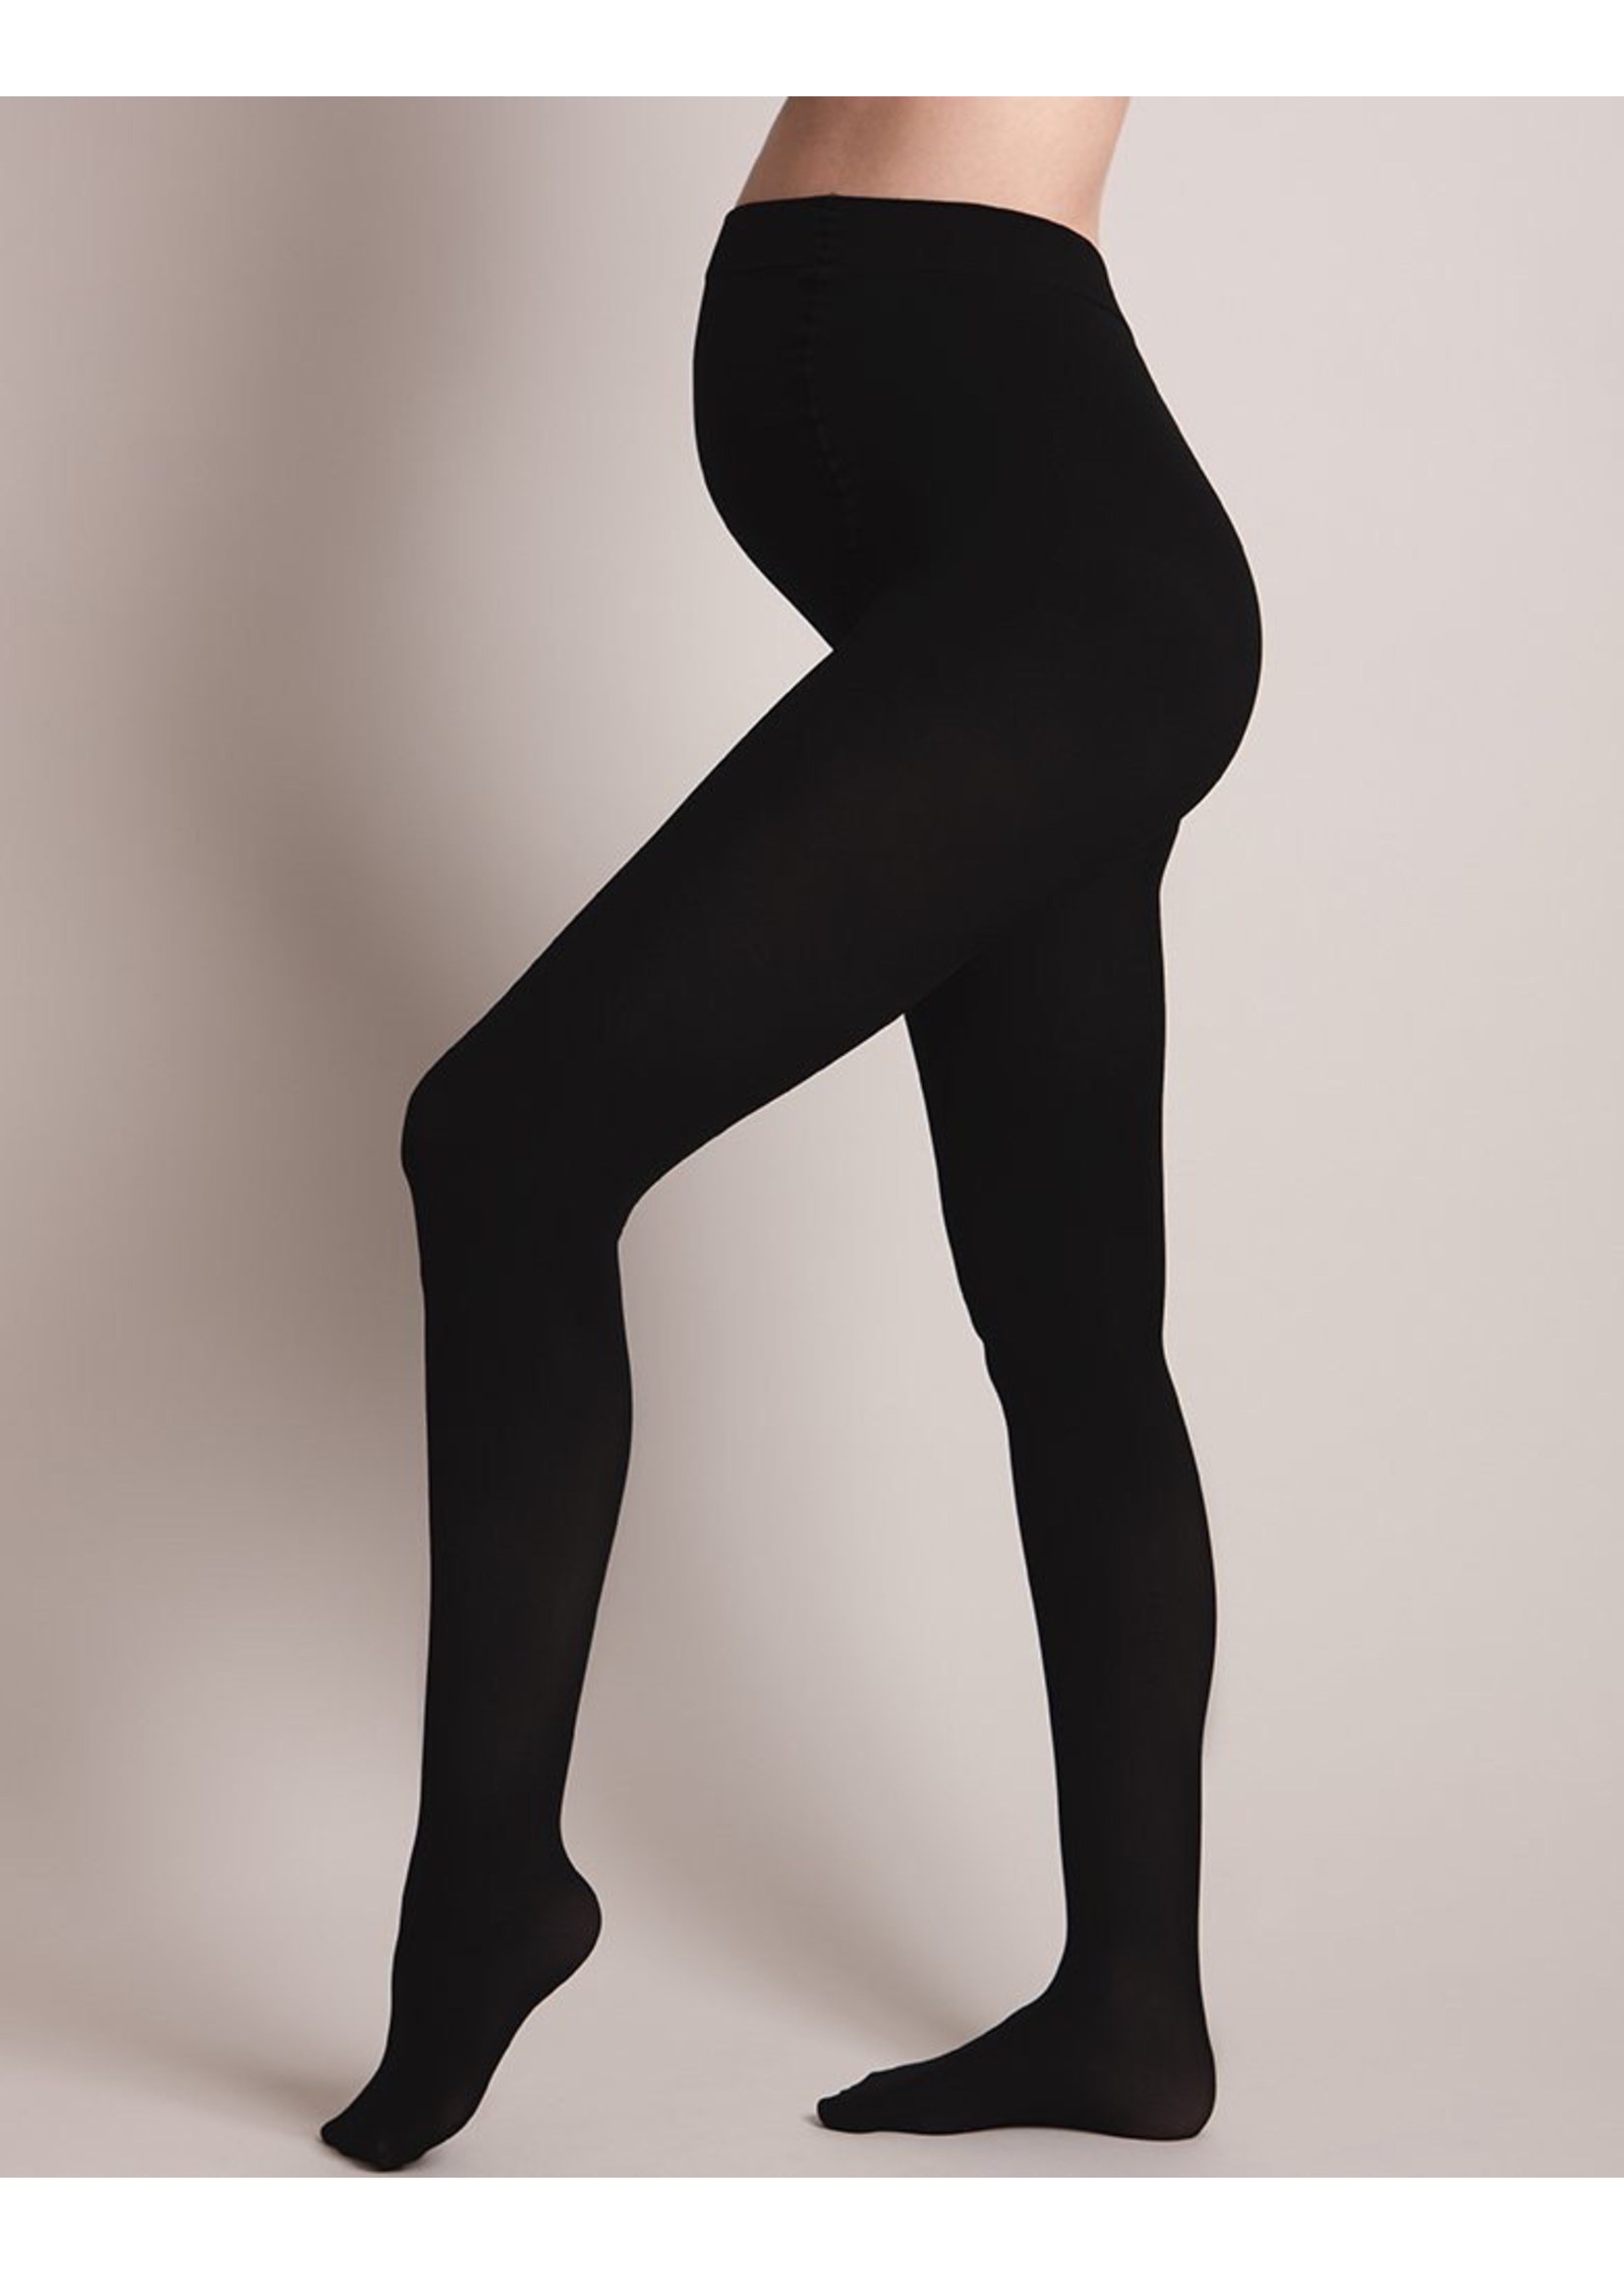 Seraphine Seraphine, Luxe 300 Denier Extra Soft Bamboo Maternity Tights